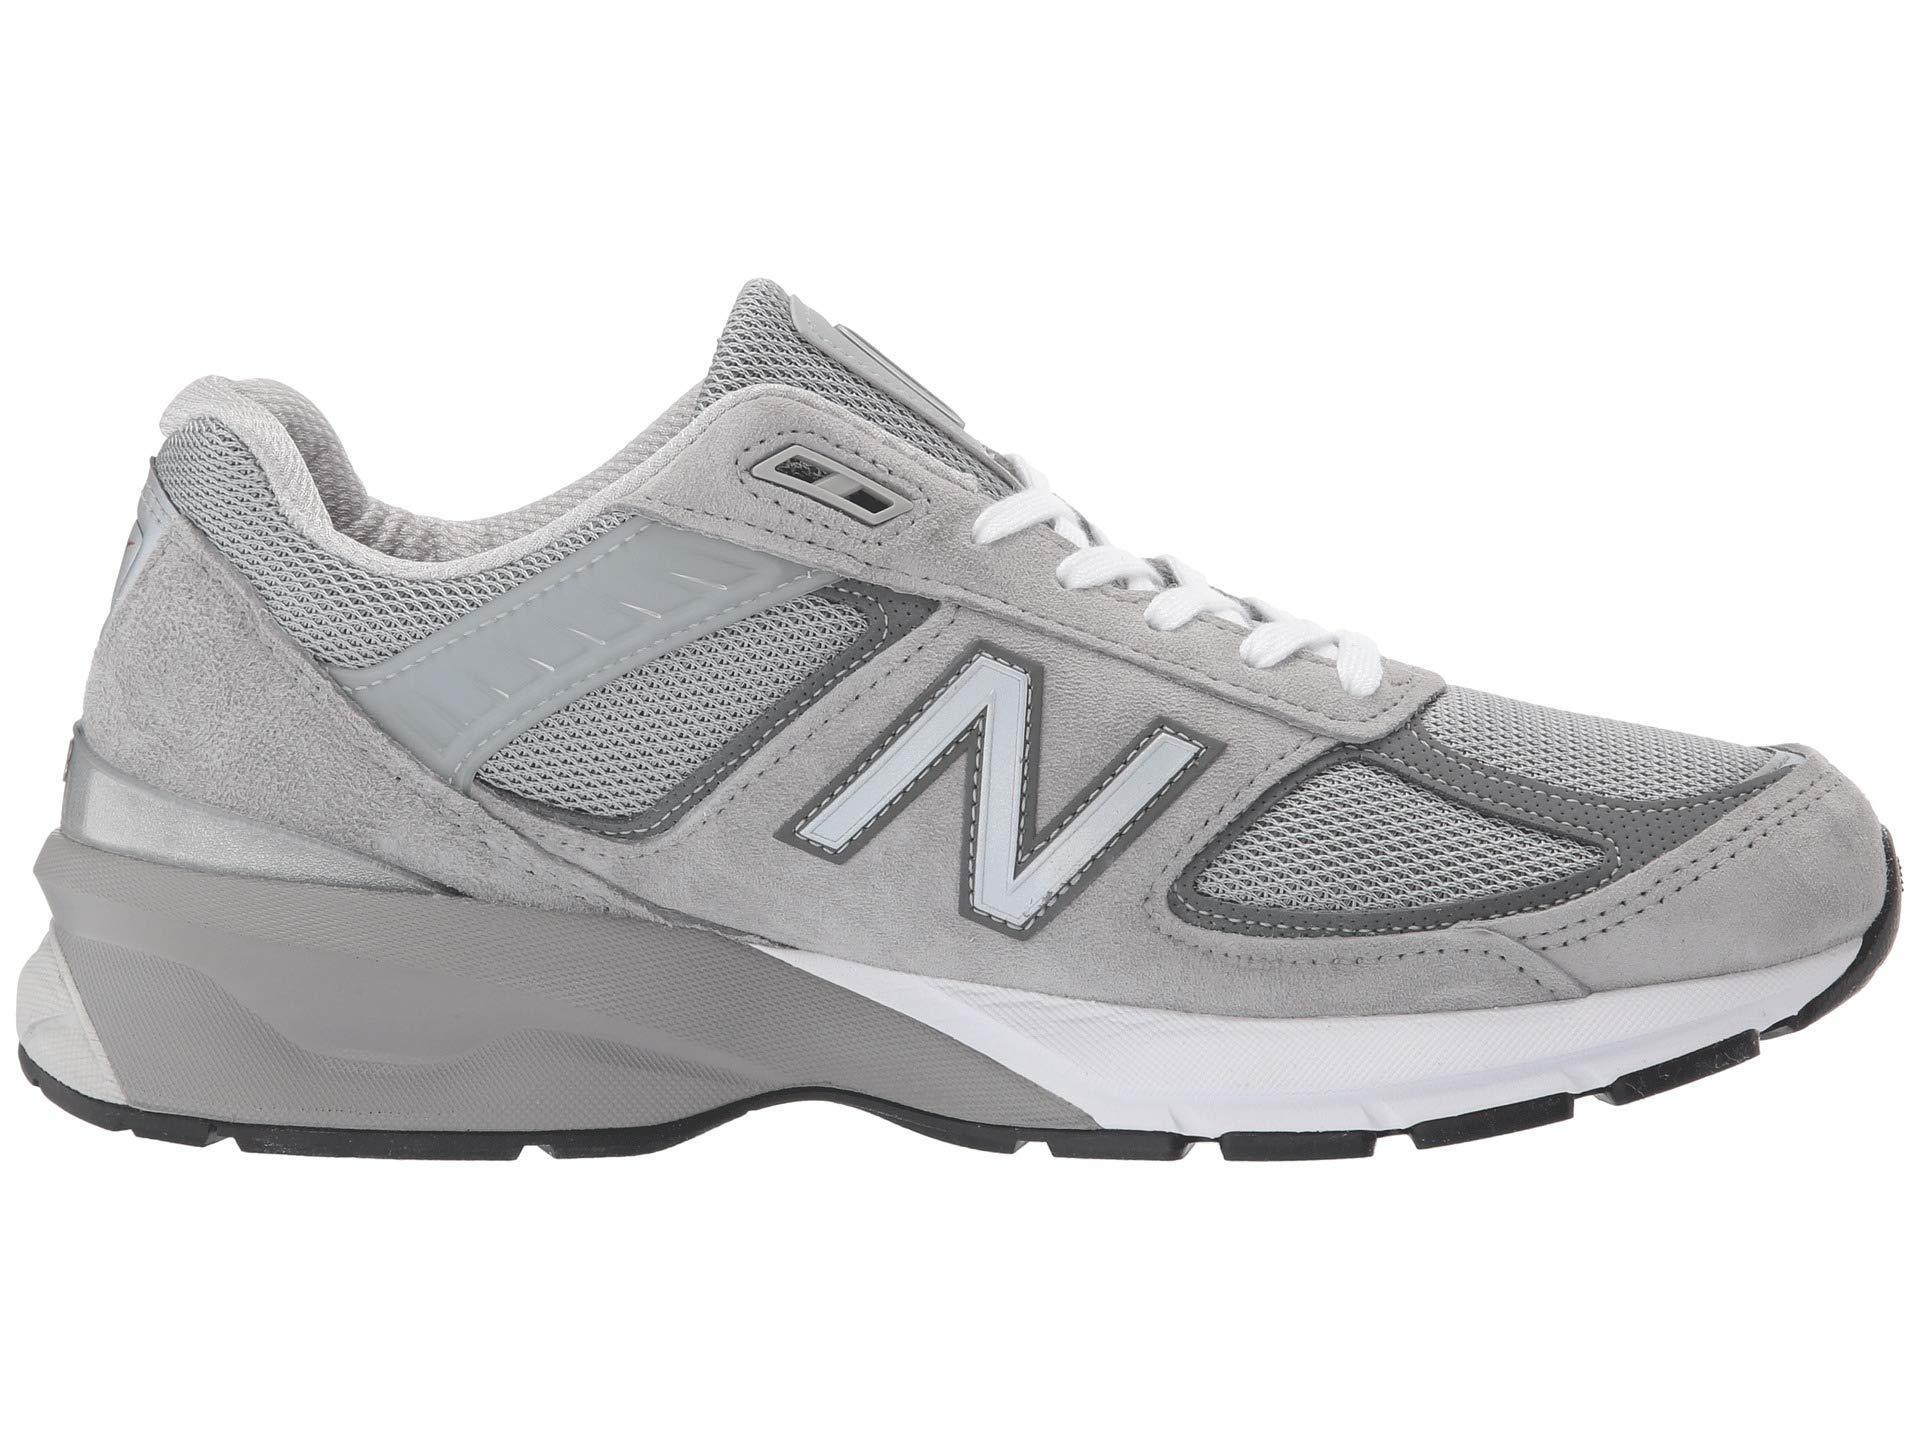 New Balance 990v5 (black/silver) Men's Classic Shoes in Gray for Men - Lyst